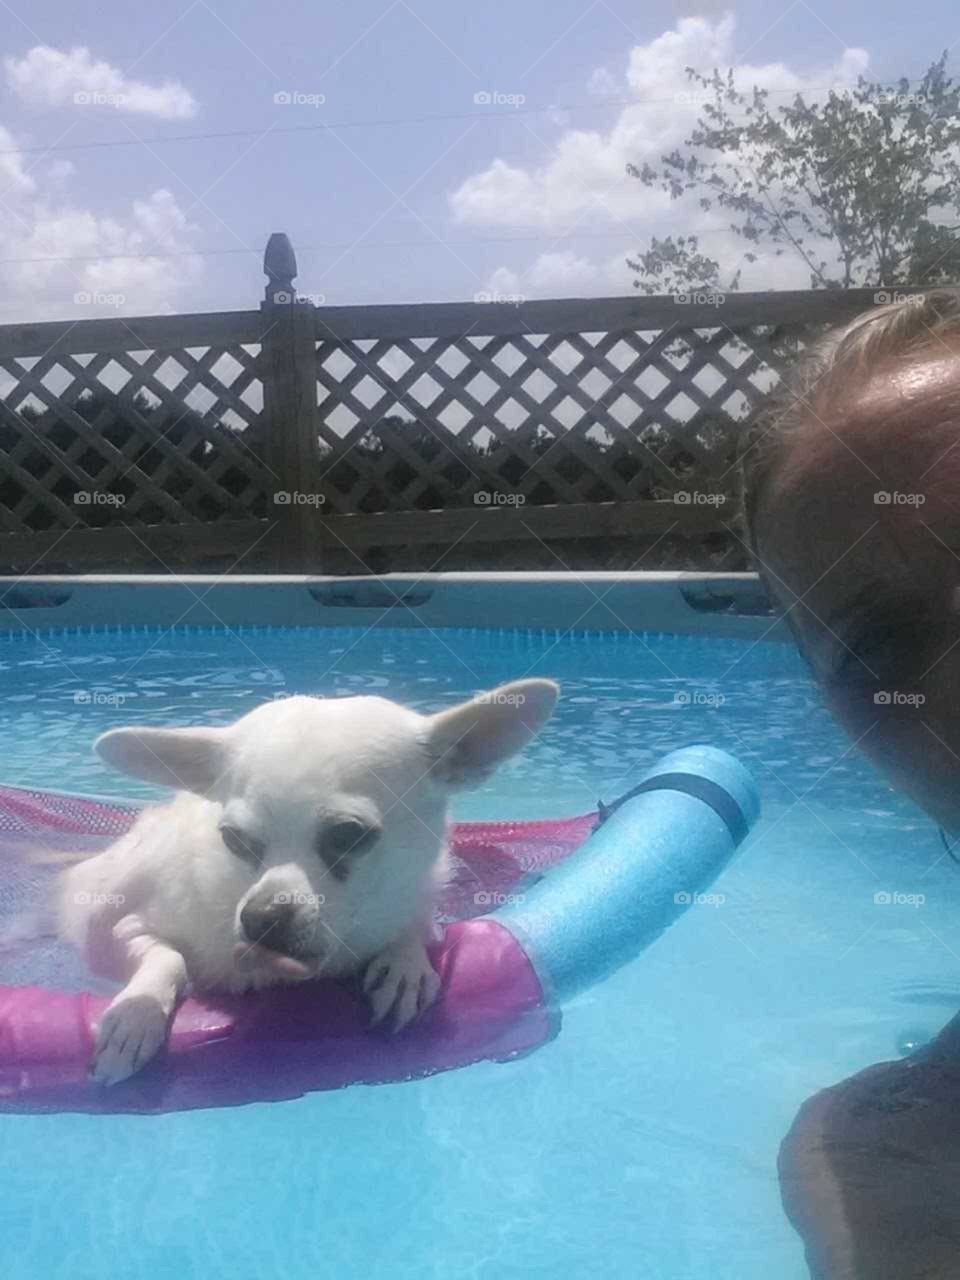 pool, water, relaxing, dog, outside